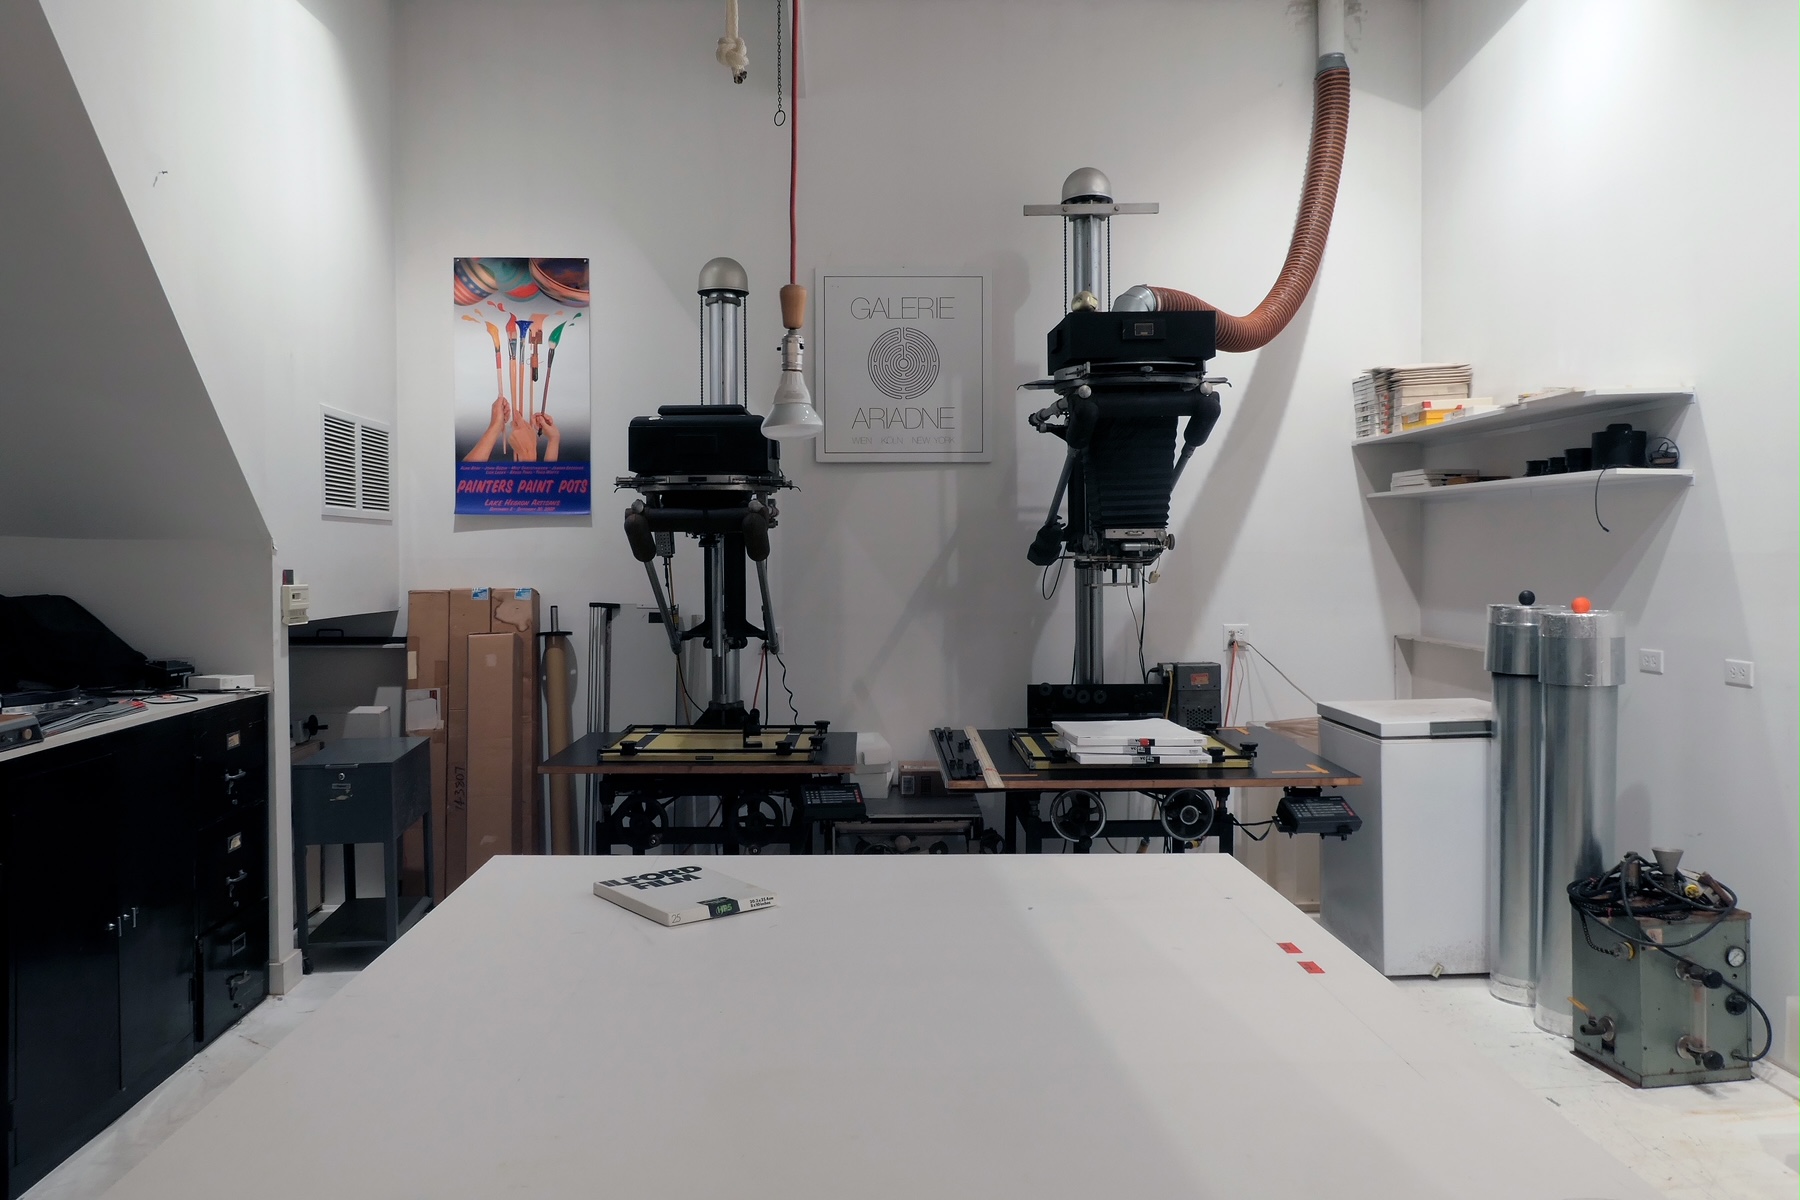 The darkroom in Todd Watts' studio offers world-class facilities for analog photography.